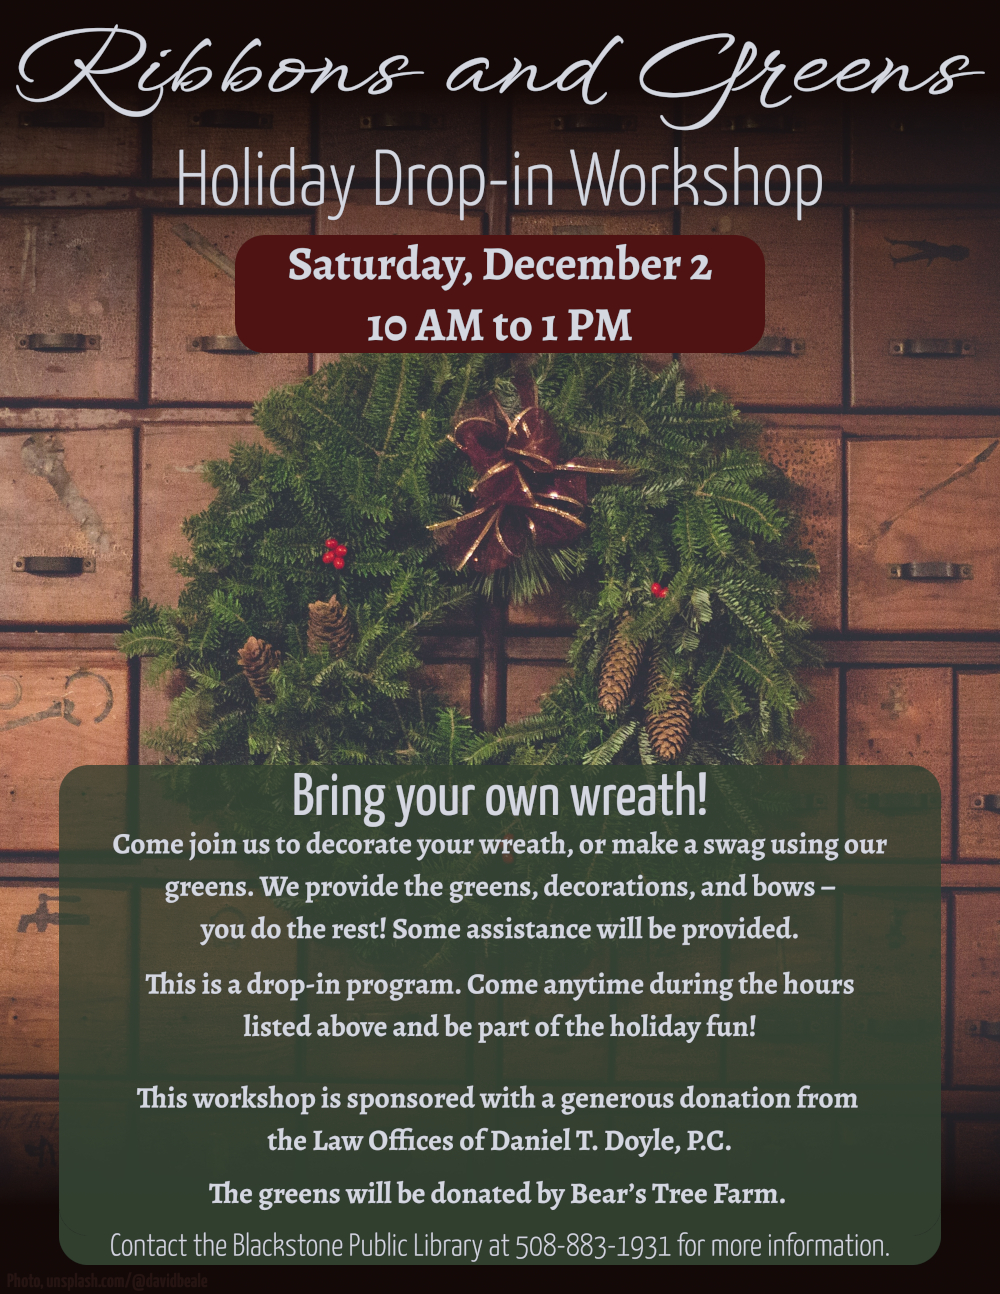 Ribbons and Greens Holiday Drop-in Workshop. Saturday, December 2, 10 AM to 1 PM.  Flyer background is a photo of a beautiful wreath made of evergreen branches, decorated with pinecones, red berries, and a red ribbon. The wreath hangs on a wall of apothecary-style drawers.  Bring your own wreath! Come join us to decorate your wreath, or make a swag using our greens. We provide the greens, decorations, and bows – you do the rest! Some assistance will be provided.  This is a drop-in program. Come anytime during 10 AM to 1 PM and be part of the holiday fun!  This workshop is sponsored with a generous donation from the Law Offices of Daniel T. Doyle, P.C. The greens will be donated by Bear’s Tree Farm.   Contact the Blackstone Public Library at 508-883-1931 for more information.